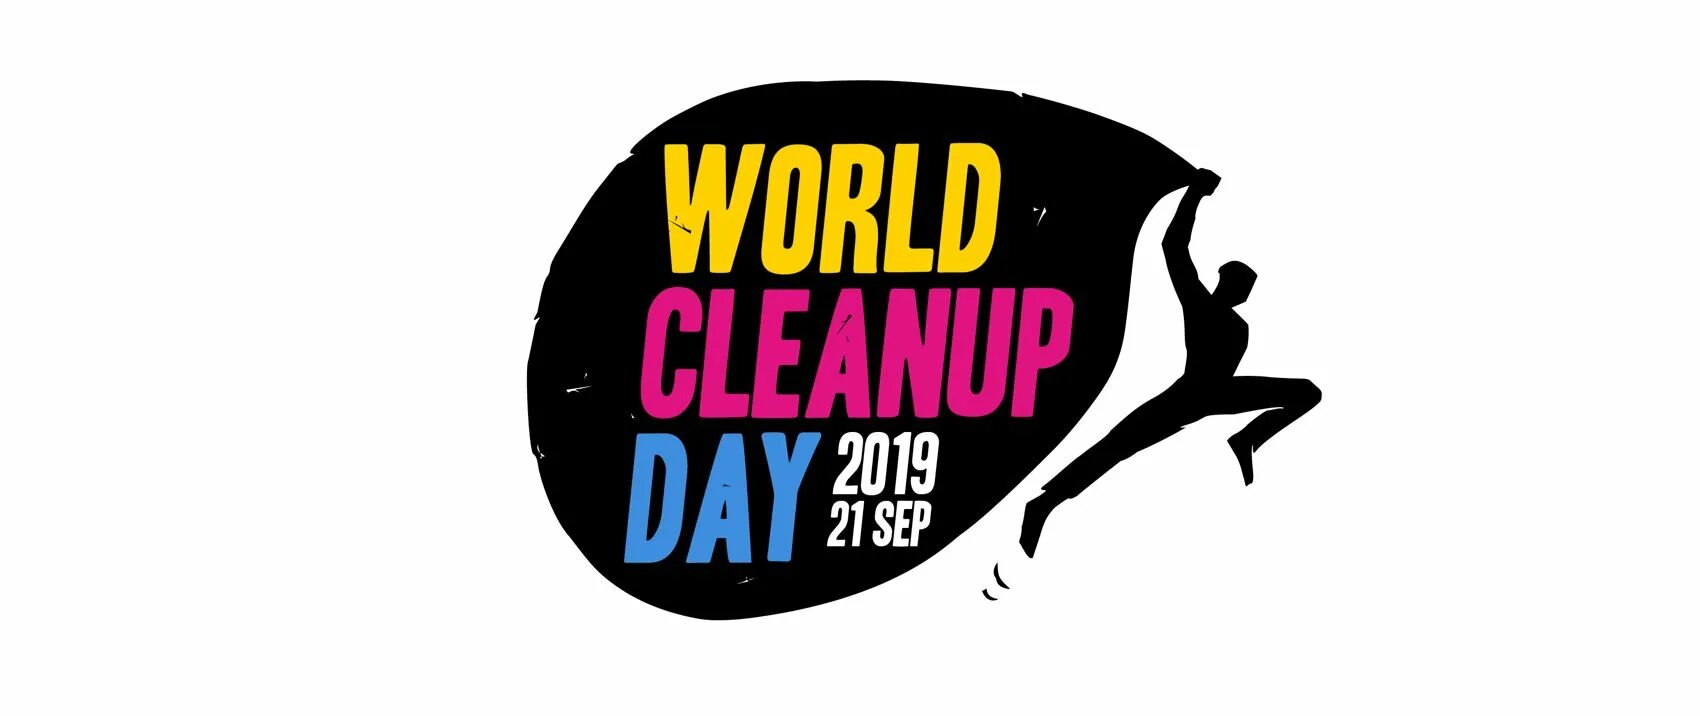 Clean up Day. World Cleanup Day. International clean-up Day рисунок. Cleanworld эмблема вектор.